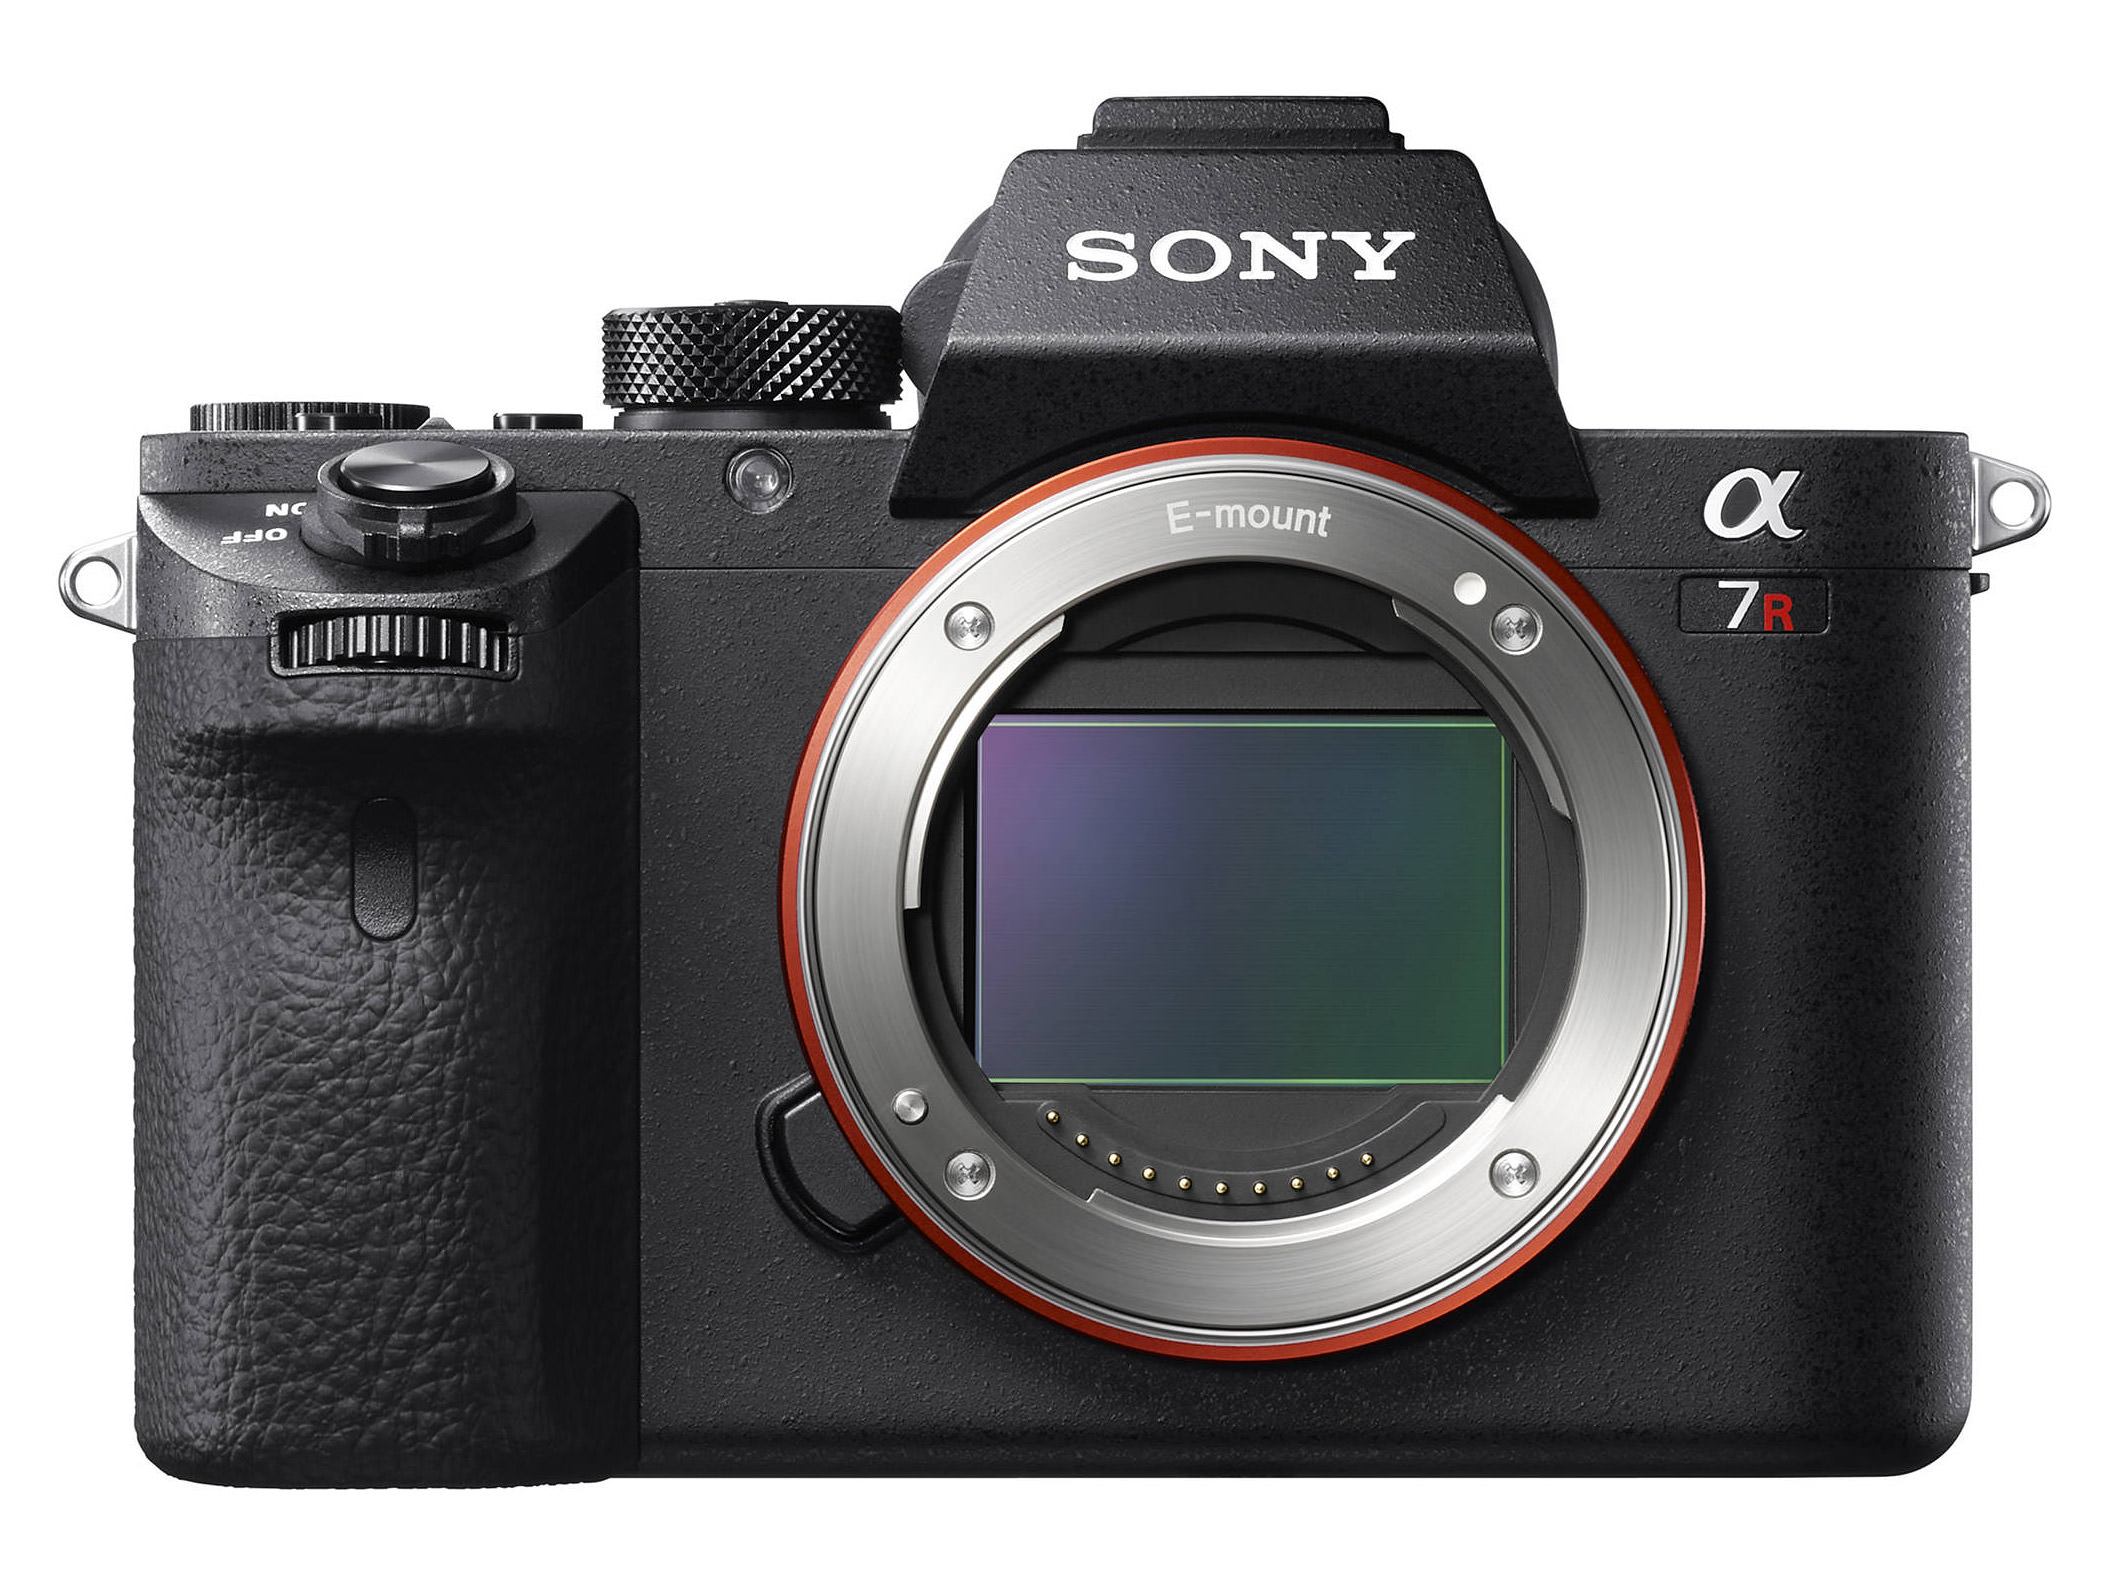 Recommended Sony A7R II Settings